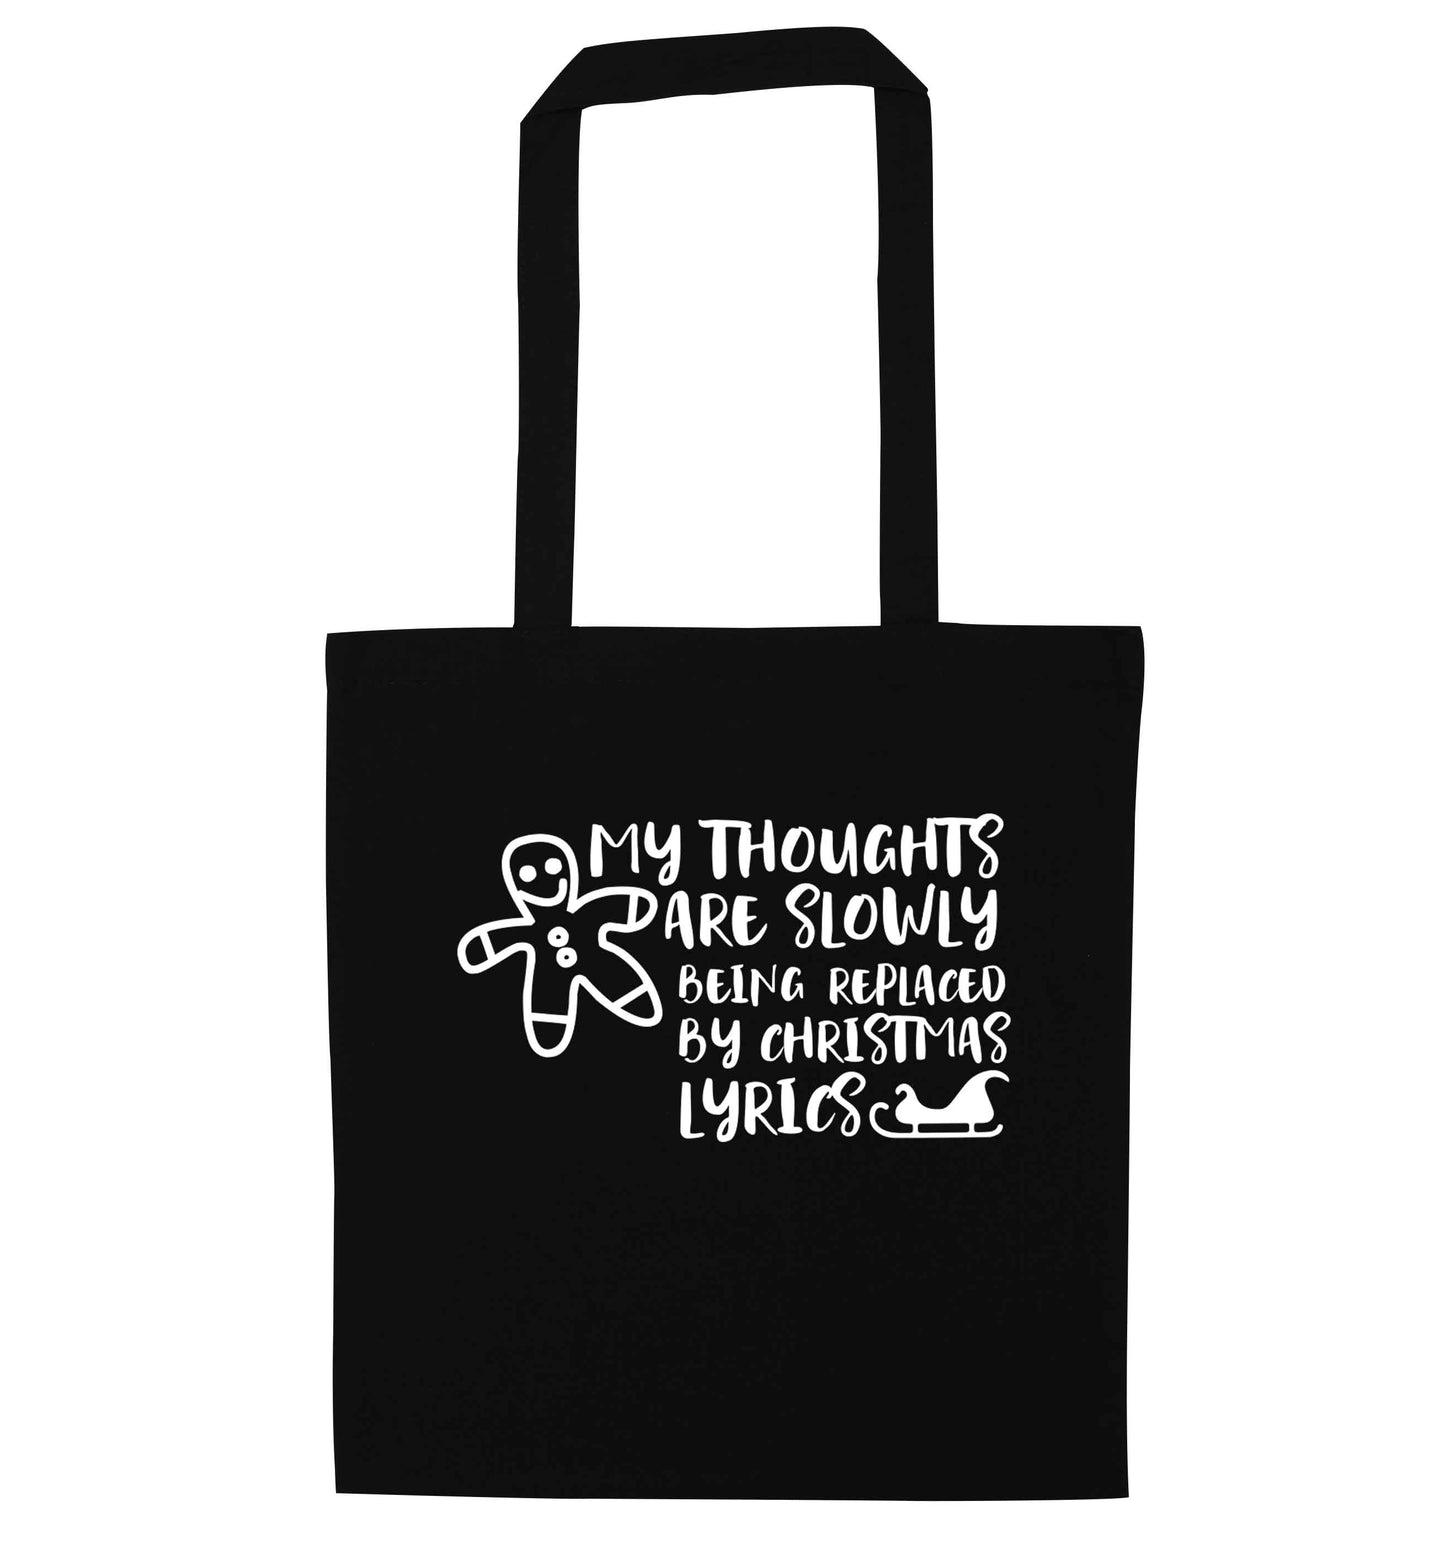 My thoughts are slowly being replaced by Christmas lyrics black tote bag